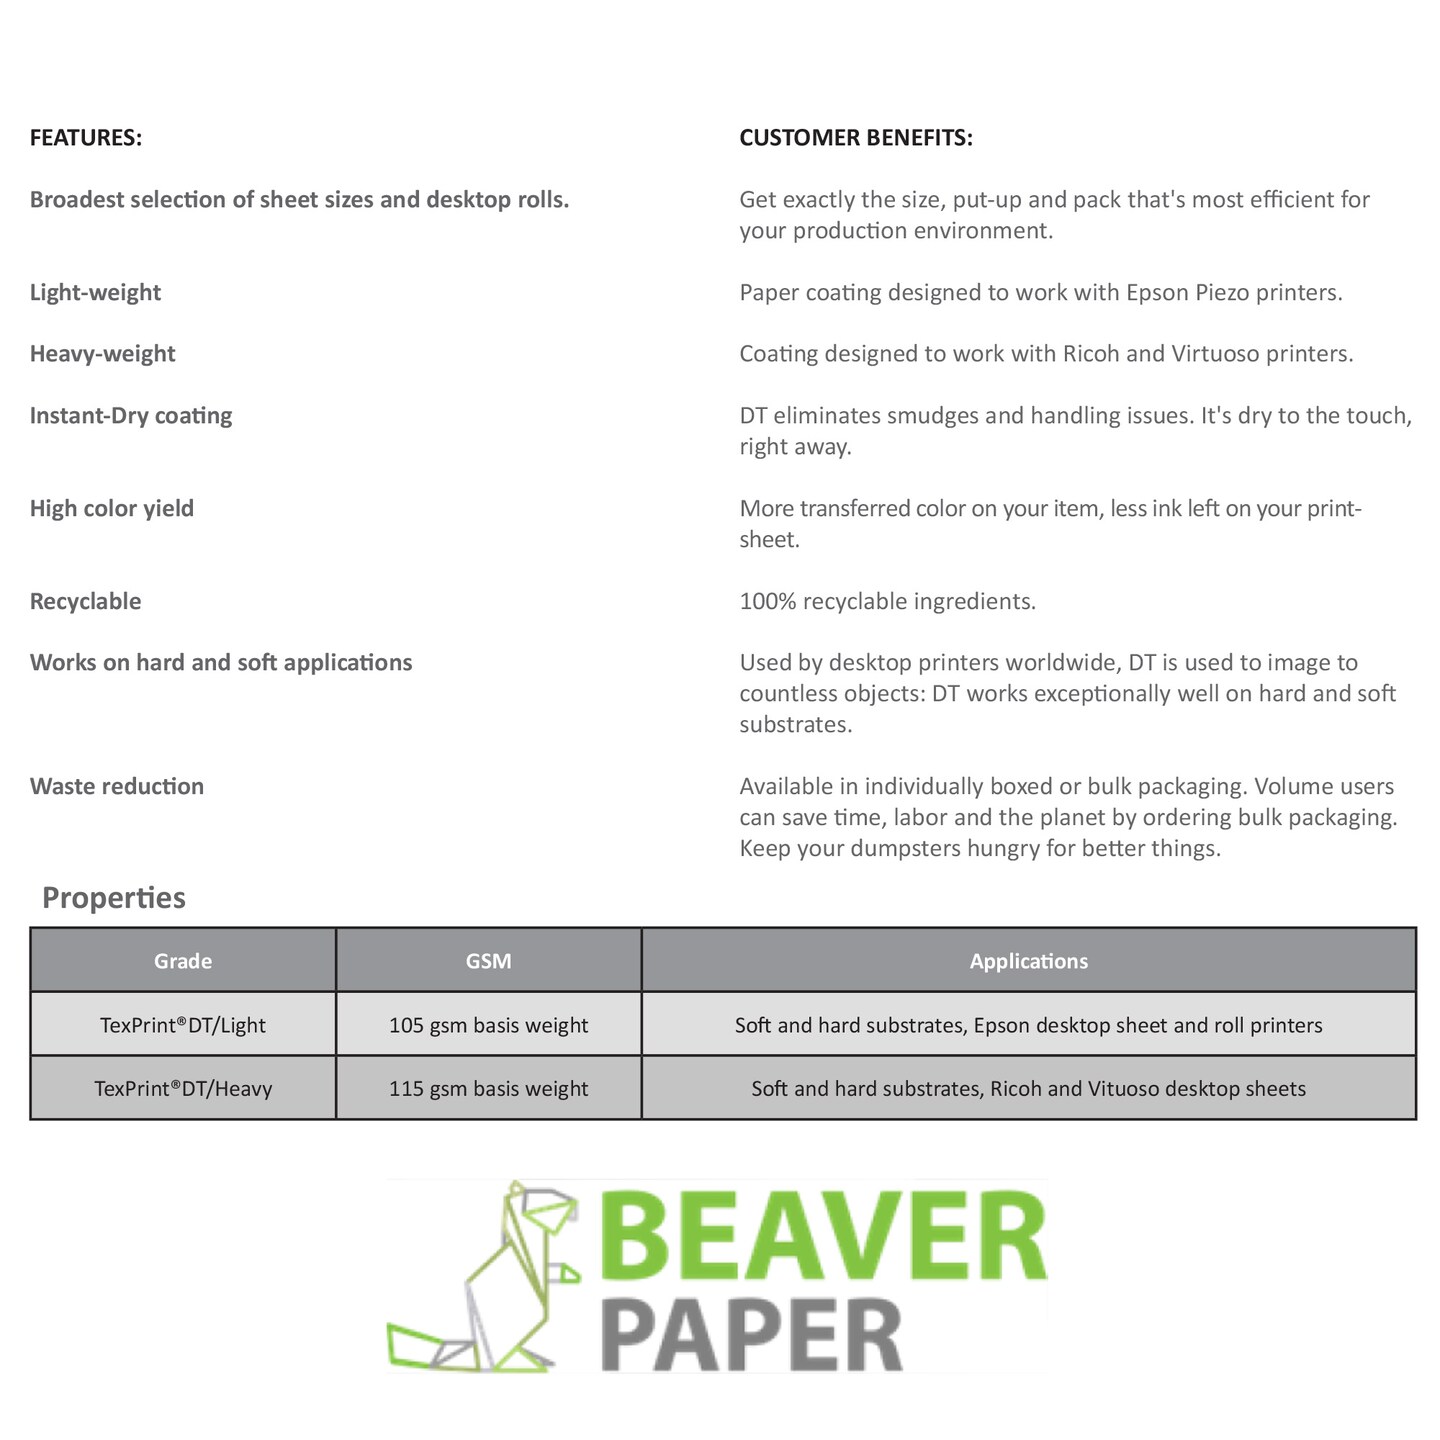 Beaver TexPrint DT Light -Replaces XP- All-Purpose High-Release Sublimation  Paper for Epson Dye Transfer, SawGrass Approved Sublimation Print Transfer  Paper, 110 Sheet Pack